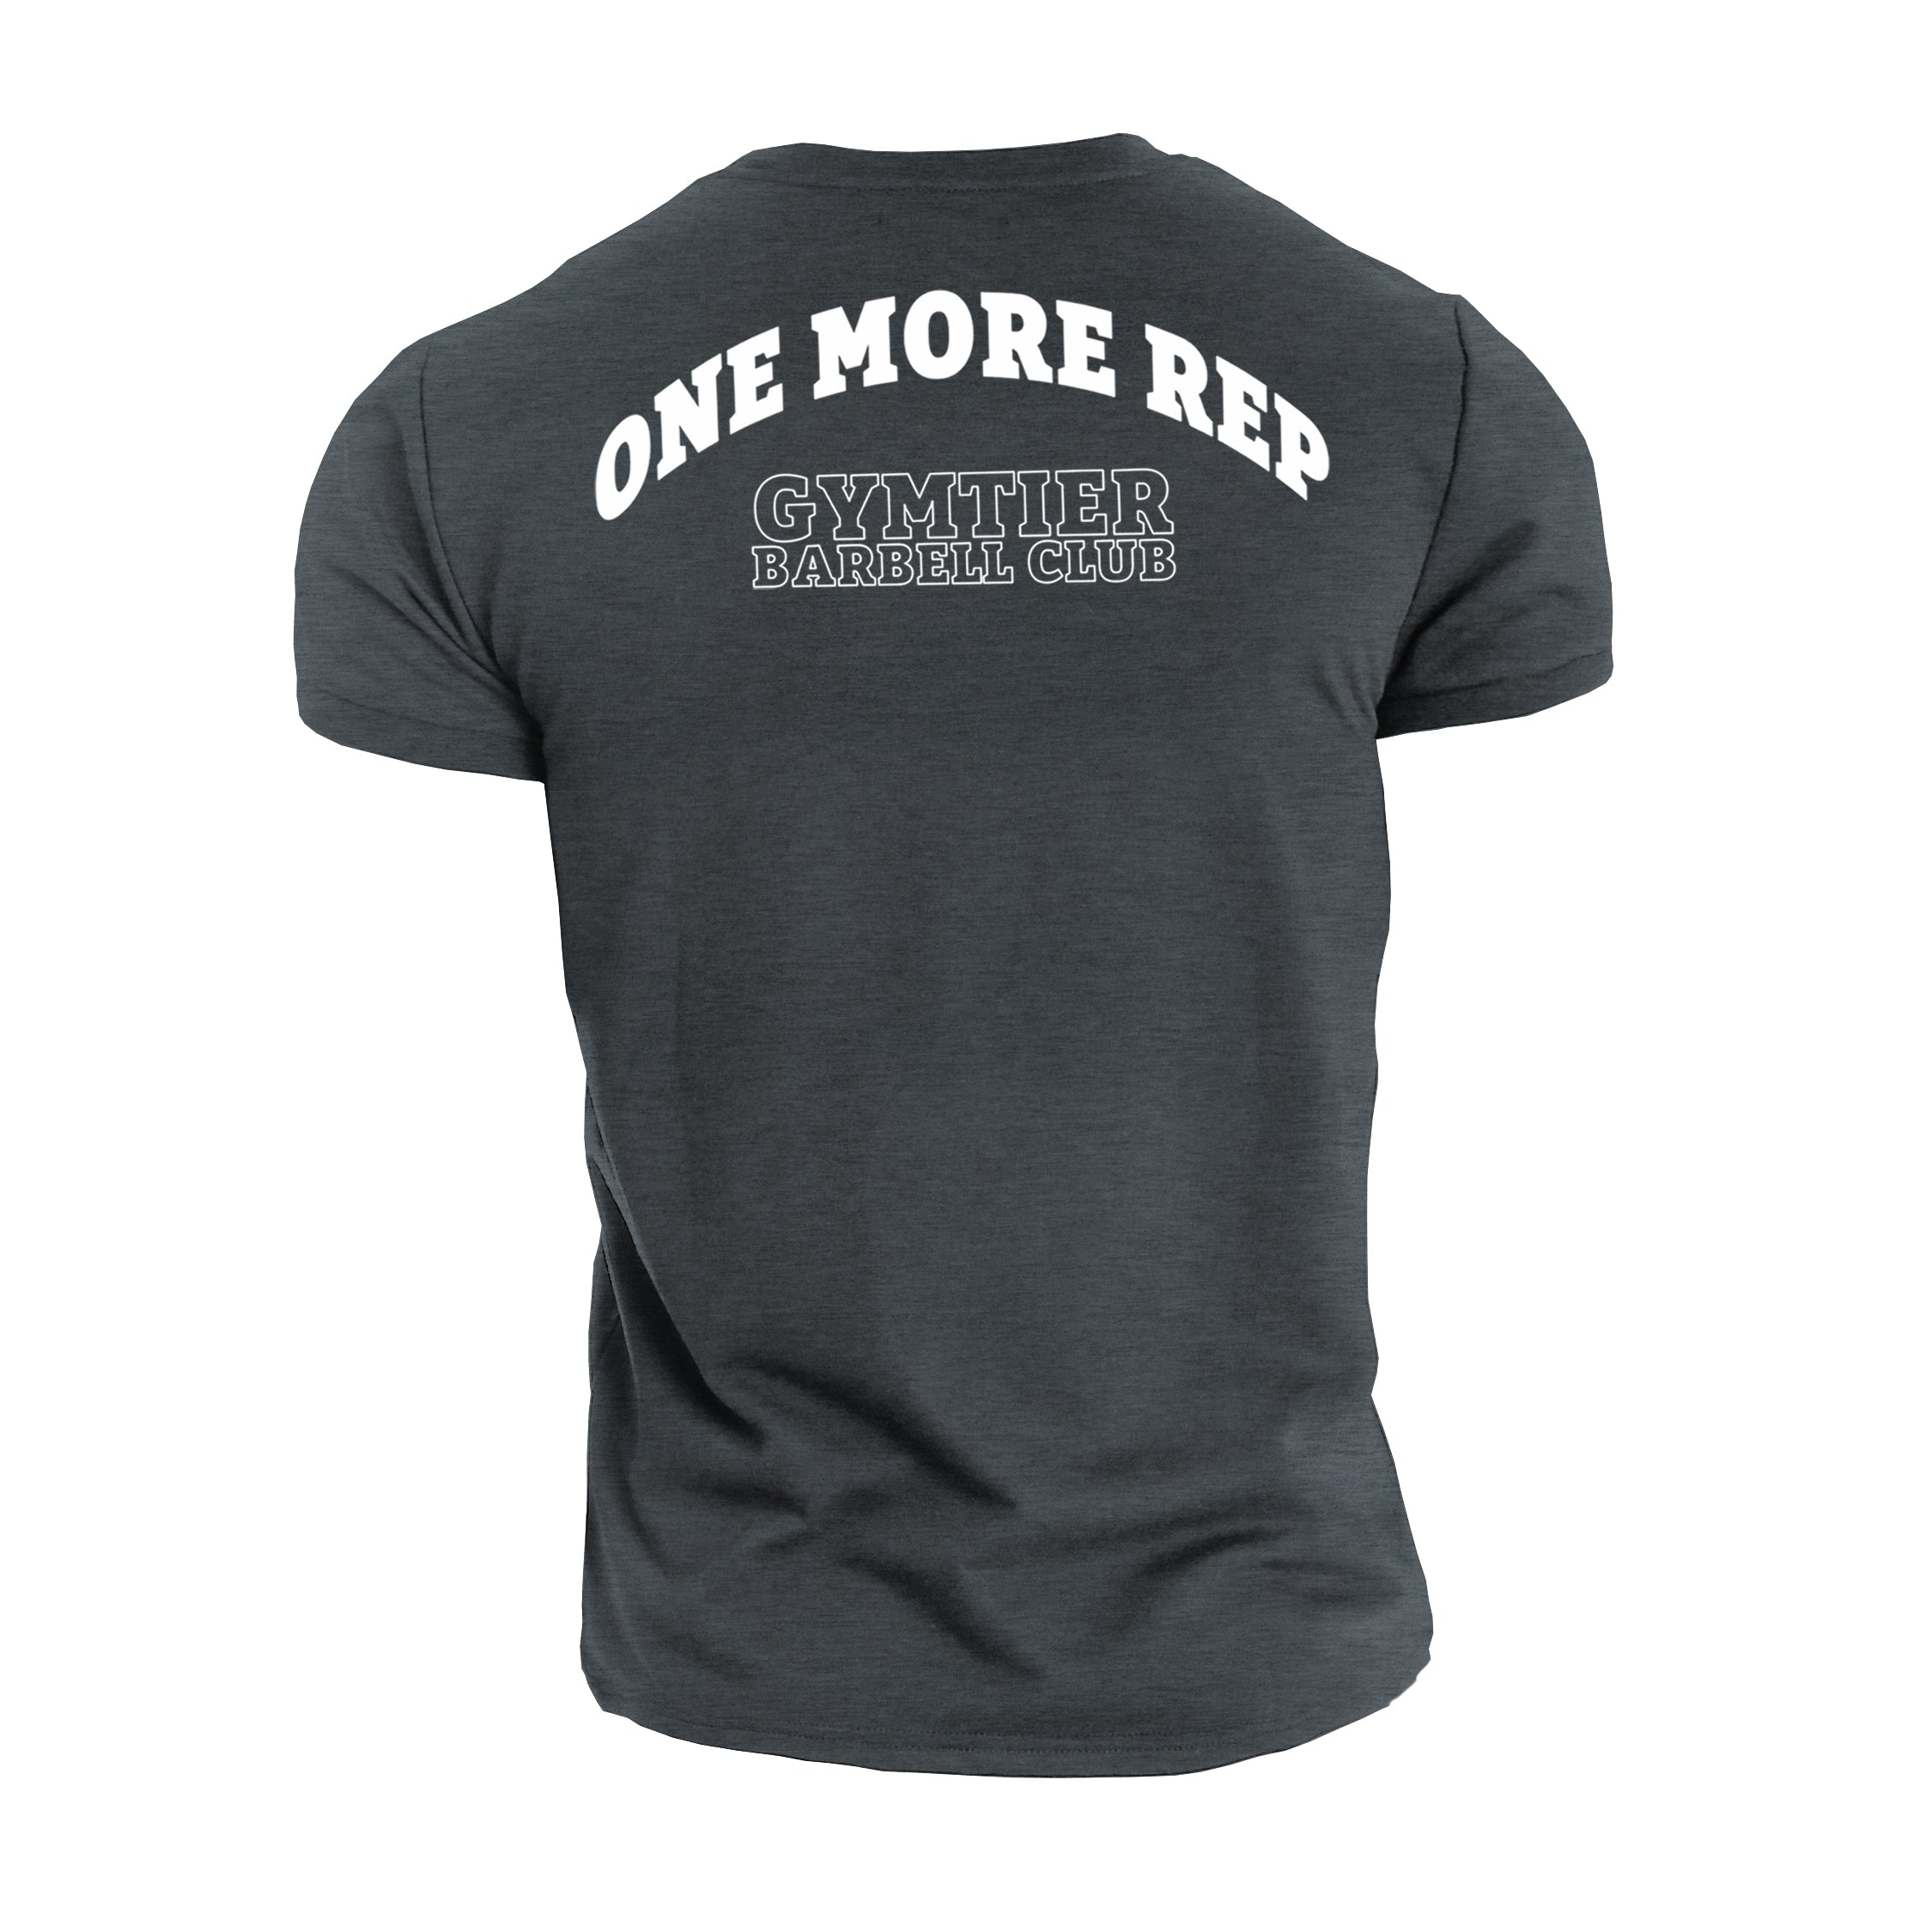 Gymtier Barbell Club - One More Rep - Gym T-Shirt